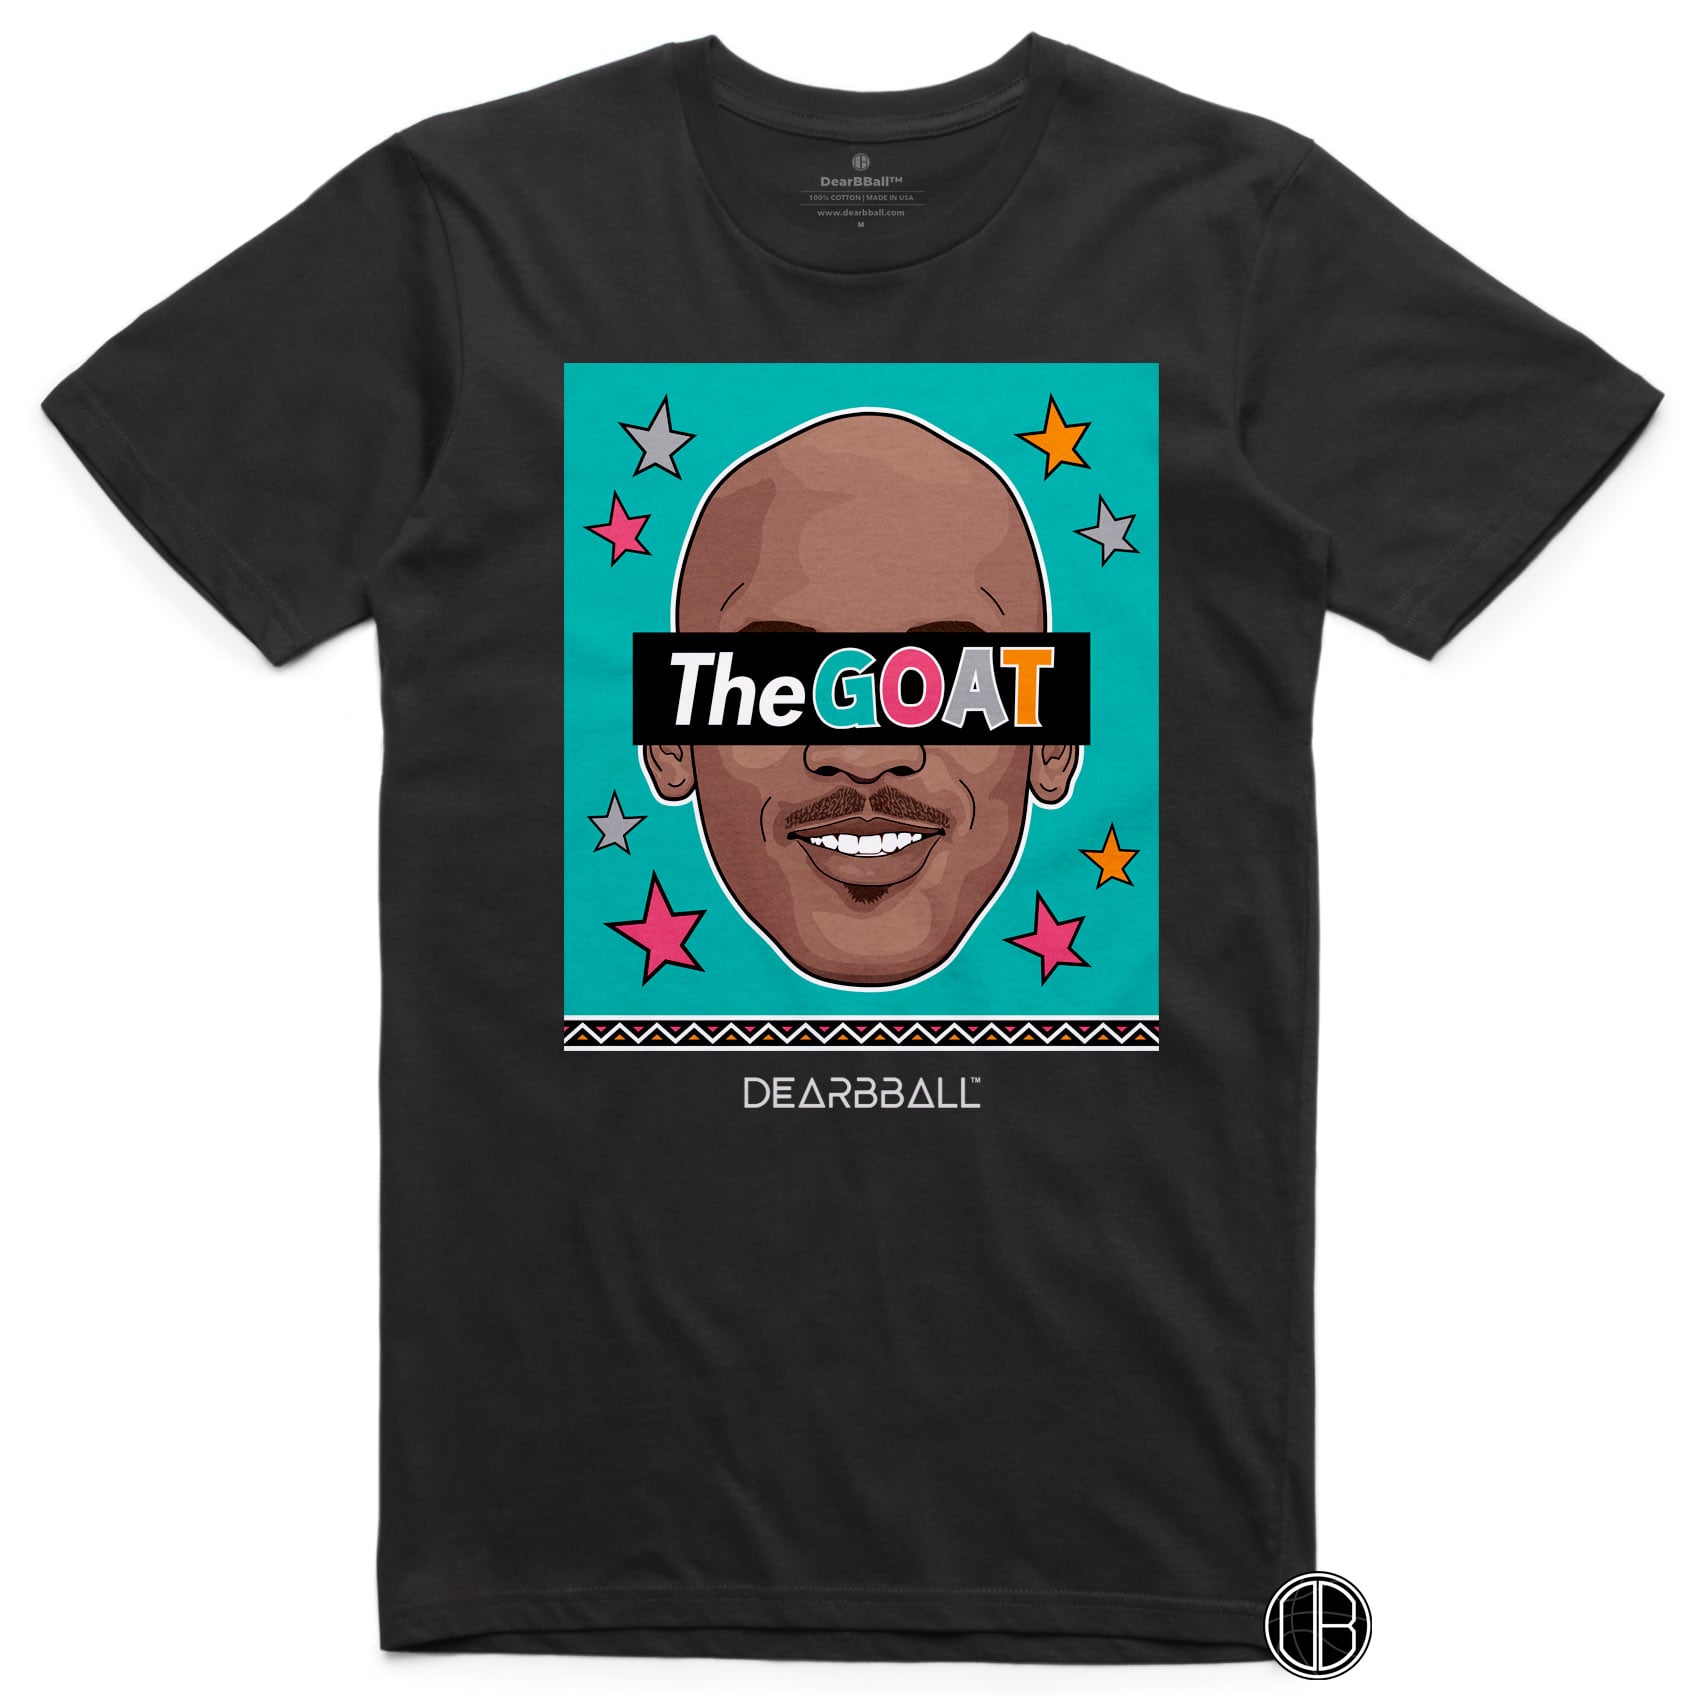 DearBBall T-Shirt - The GOAT ASG 96 Edition